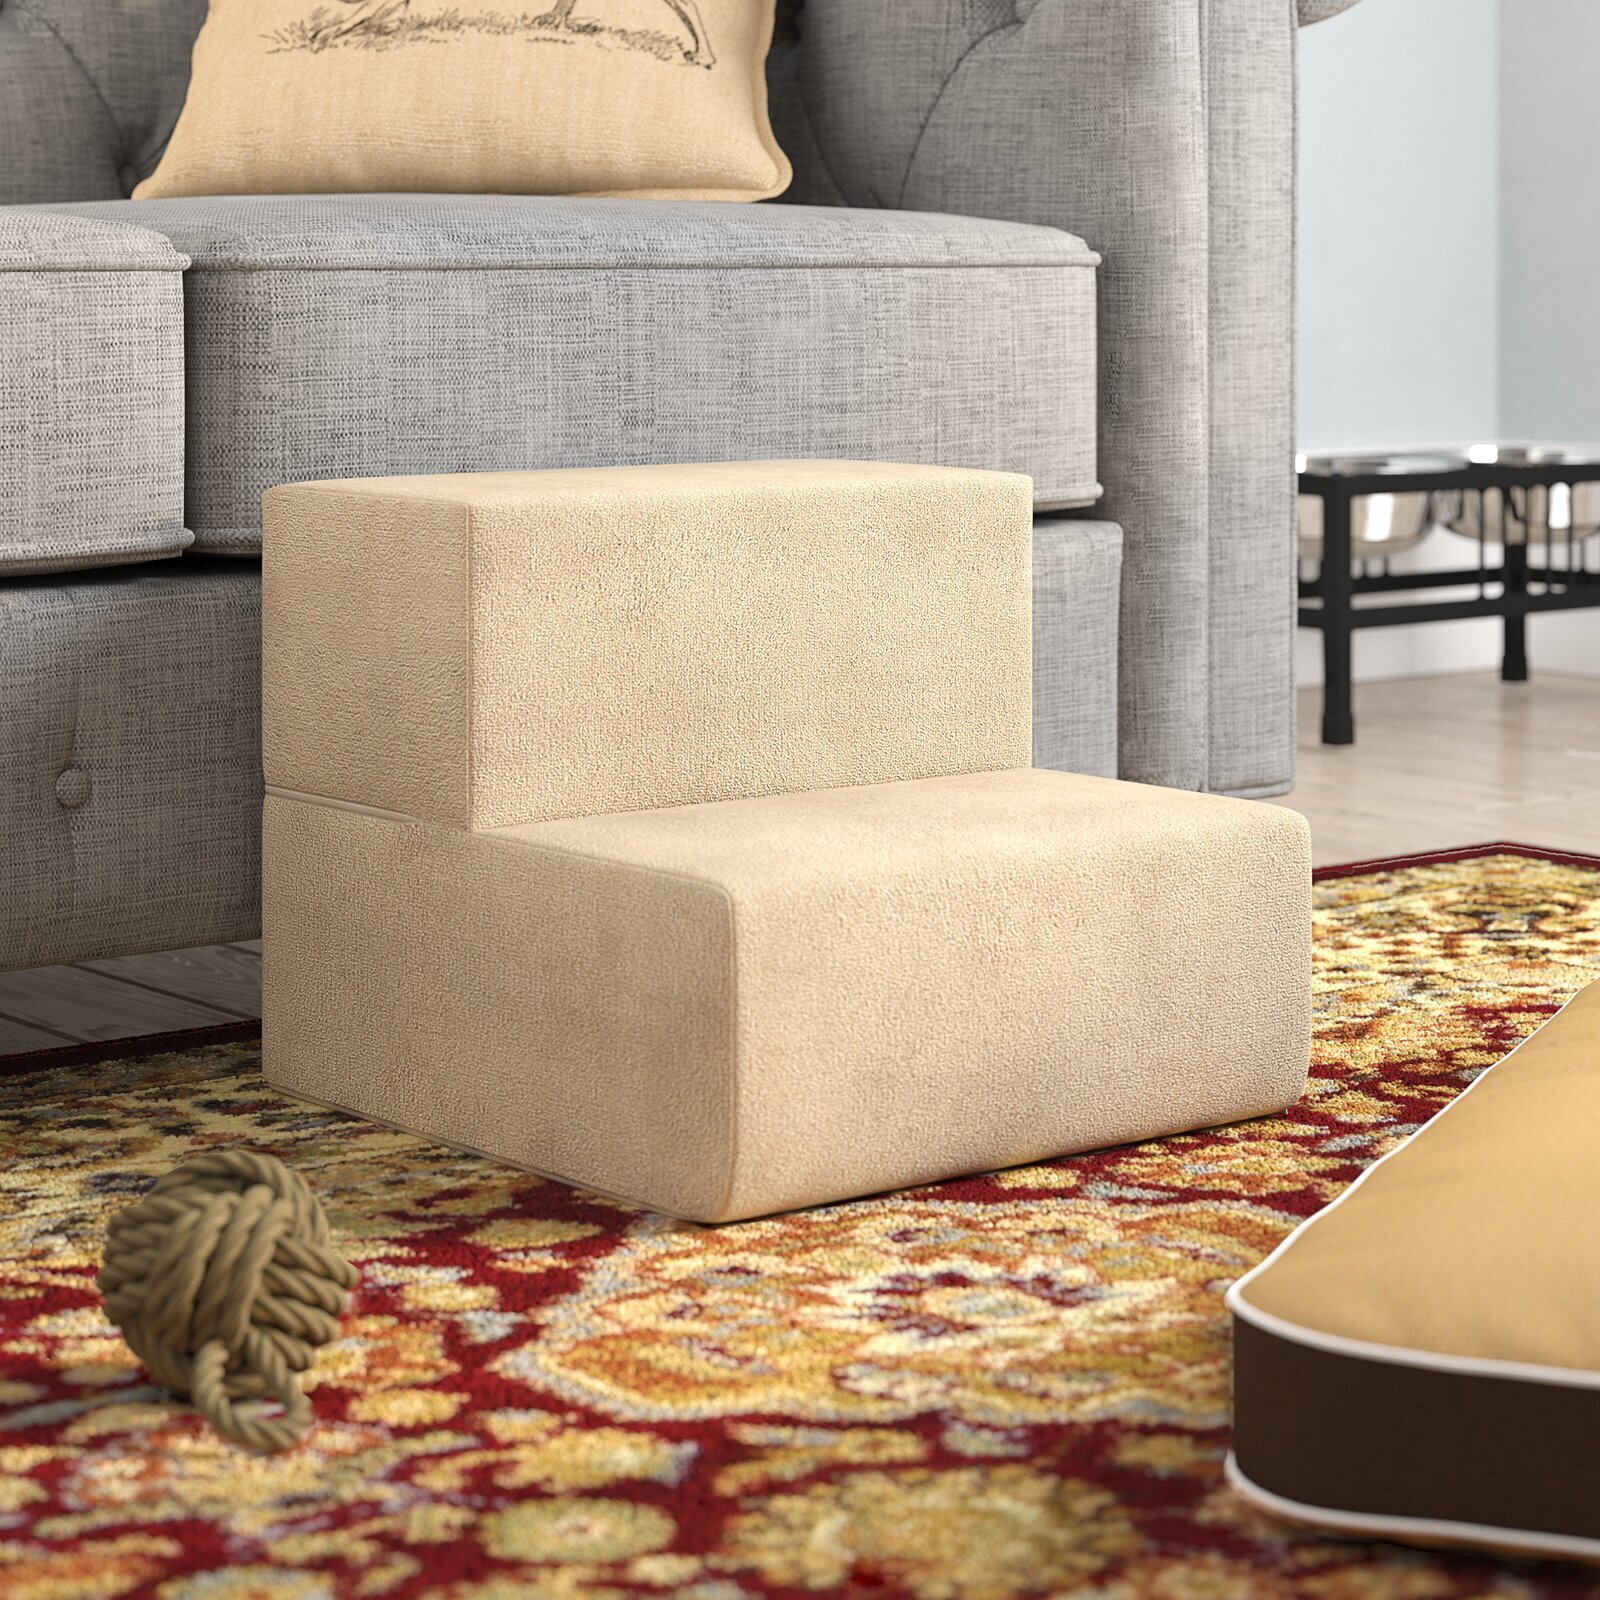 Dog steps for bed or sofa in a carpeted material